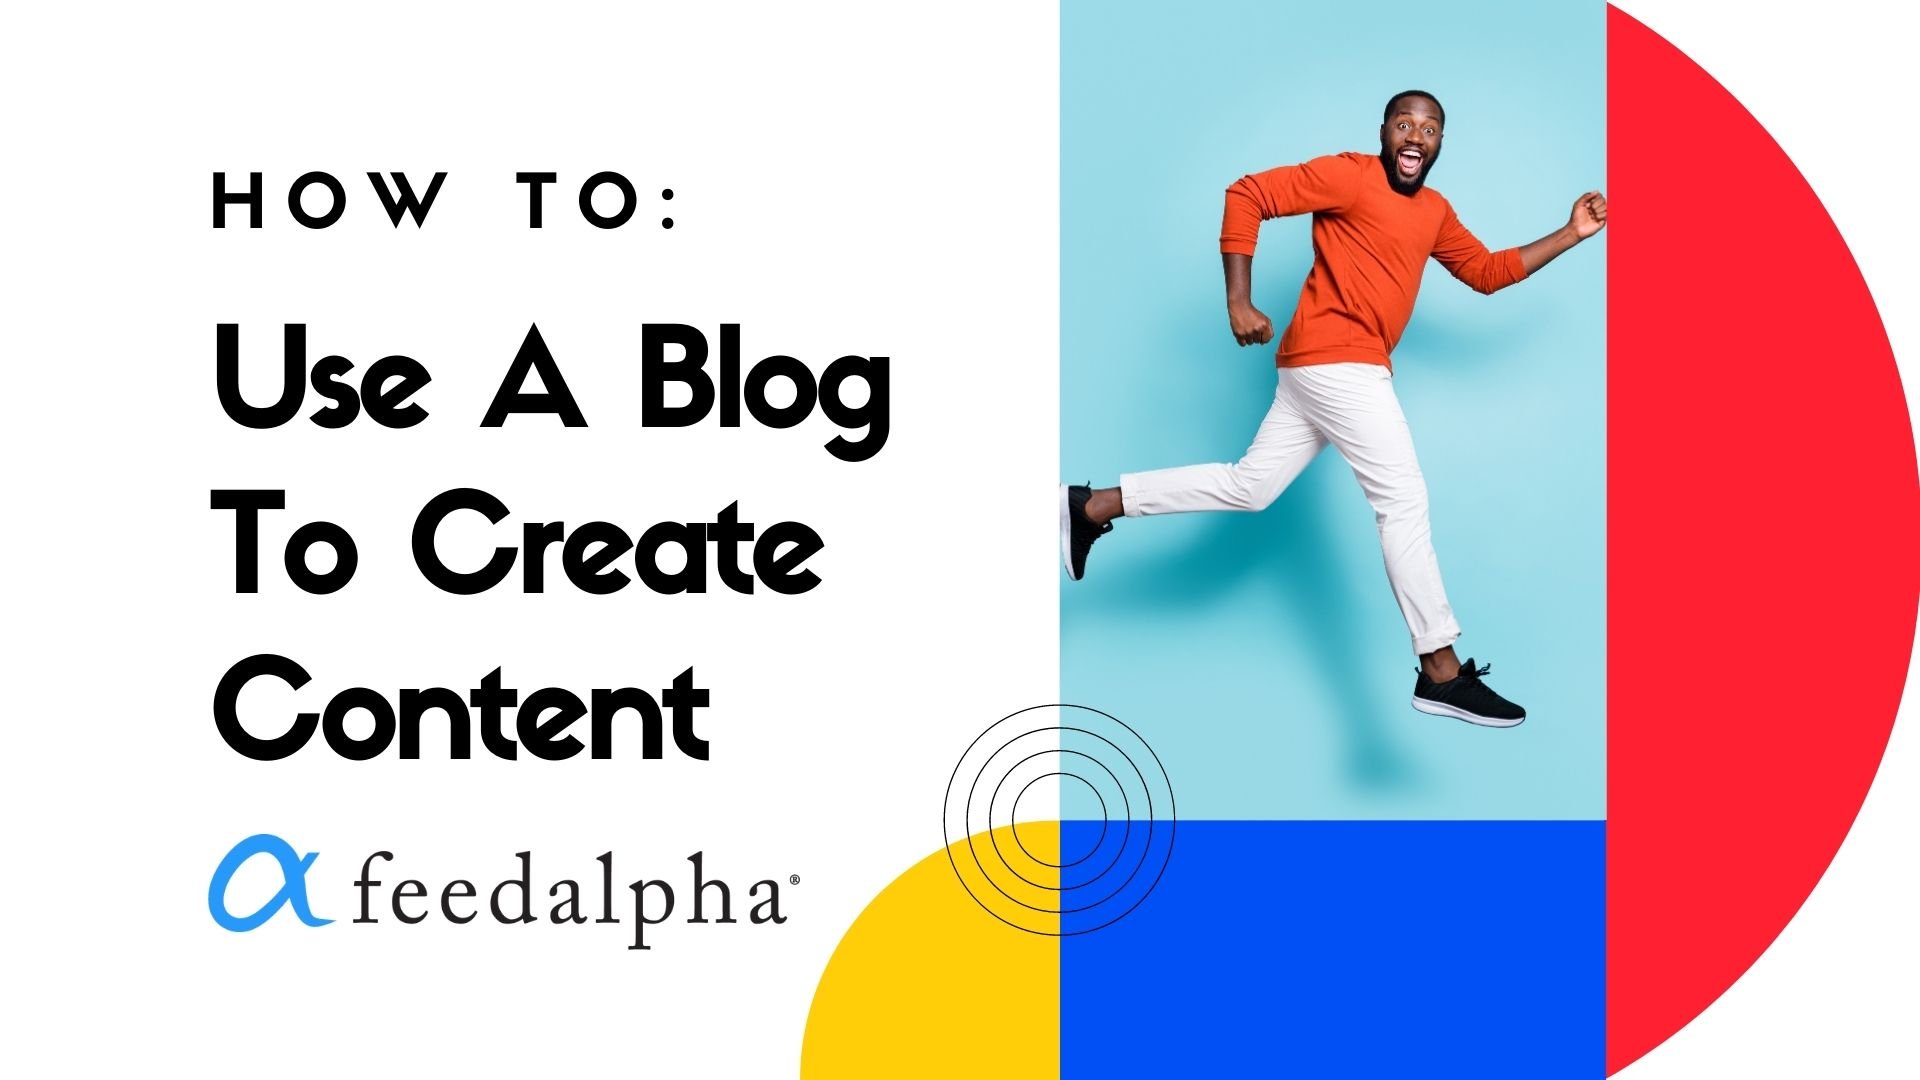 Use A Blog To Create Content